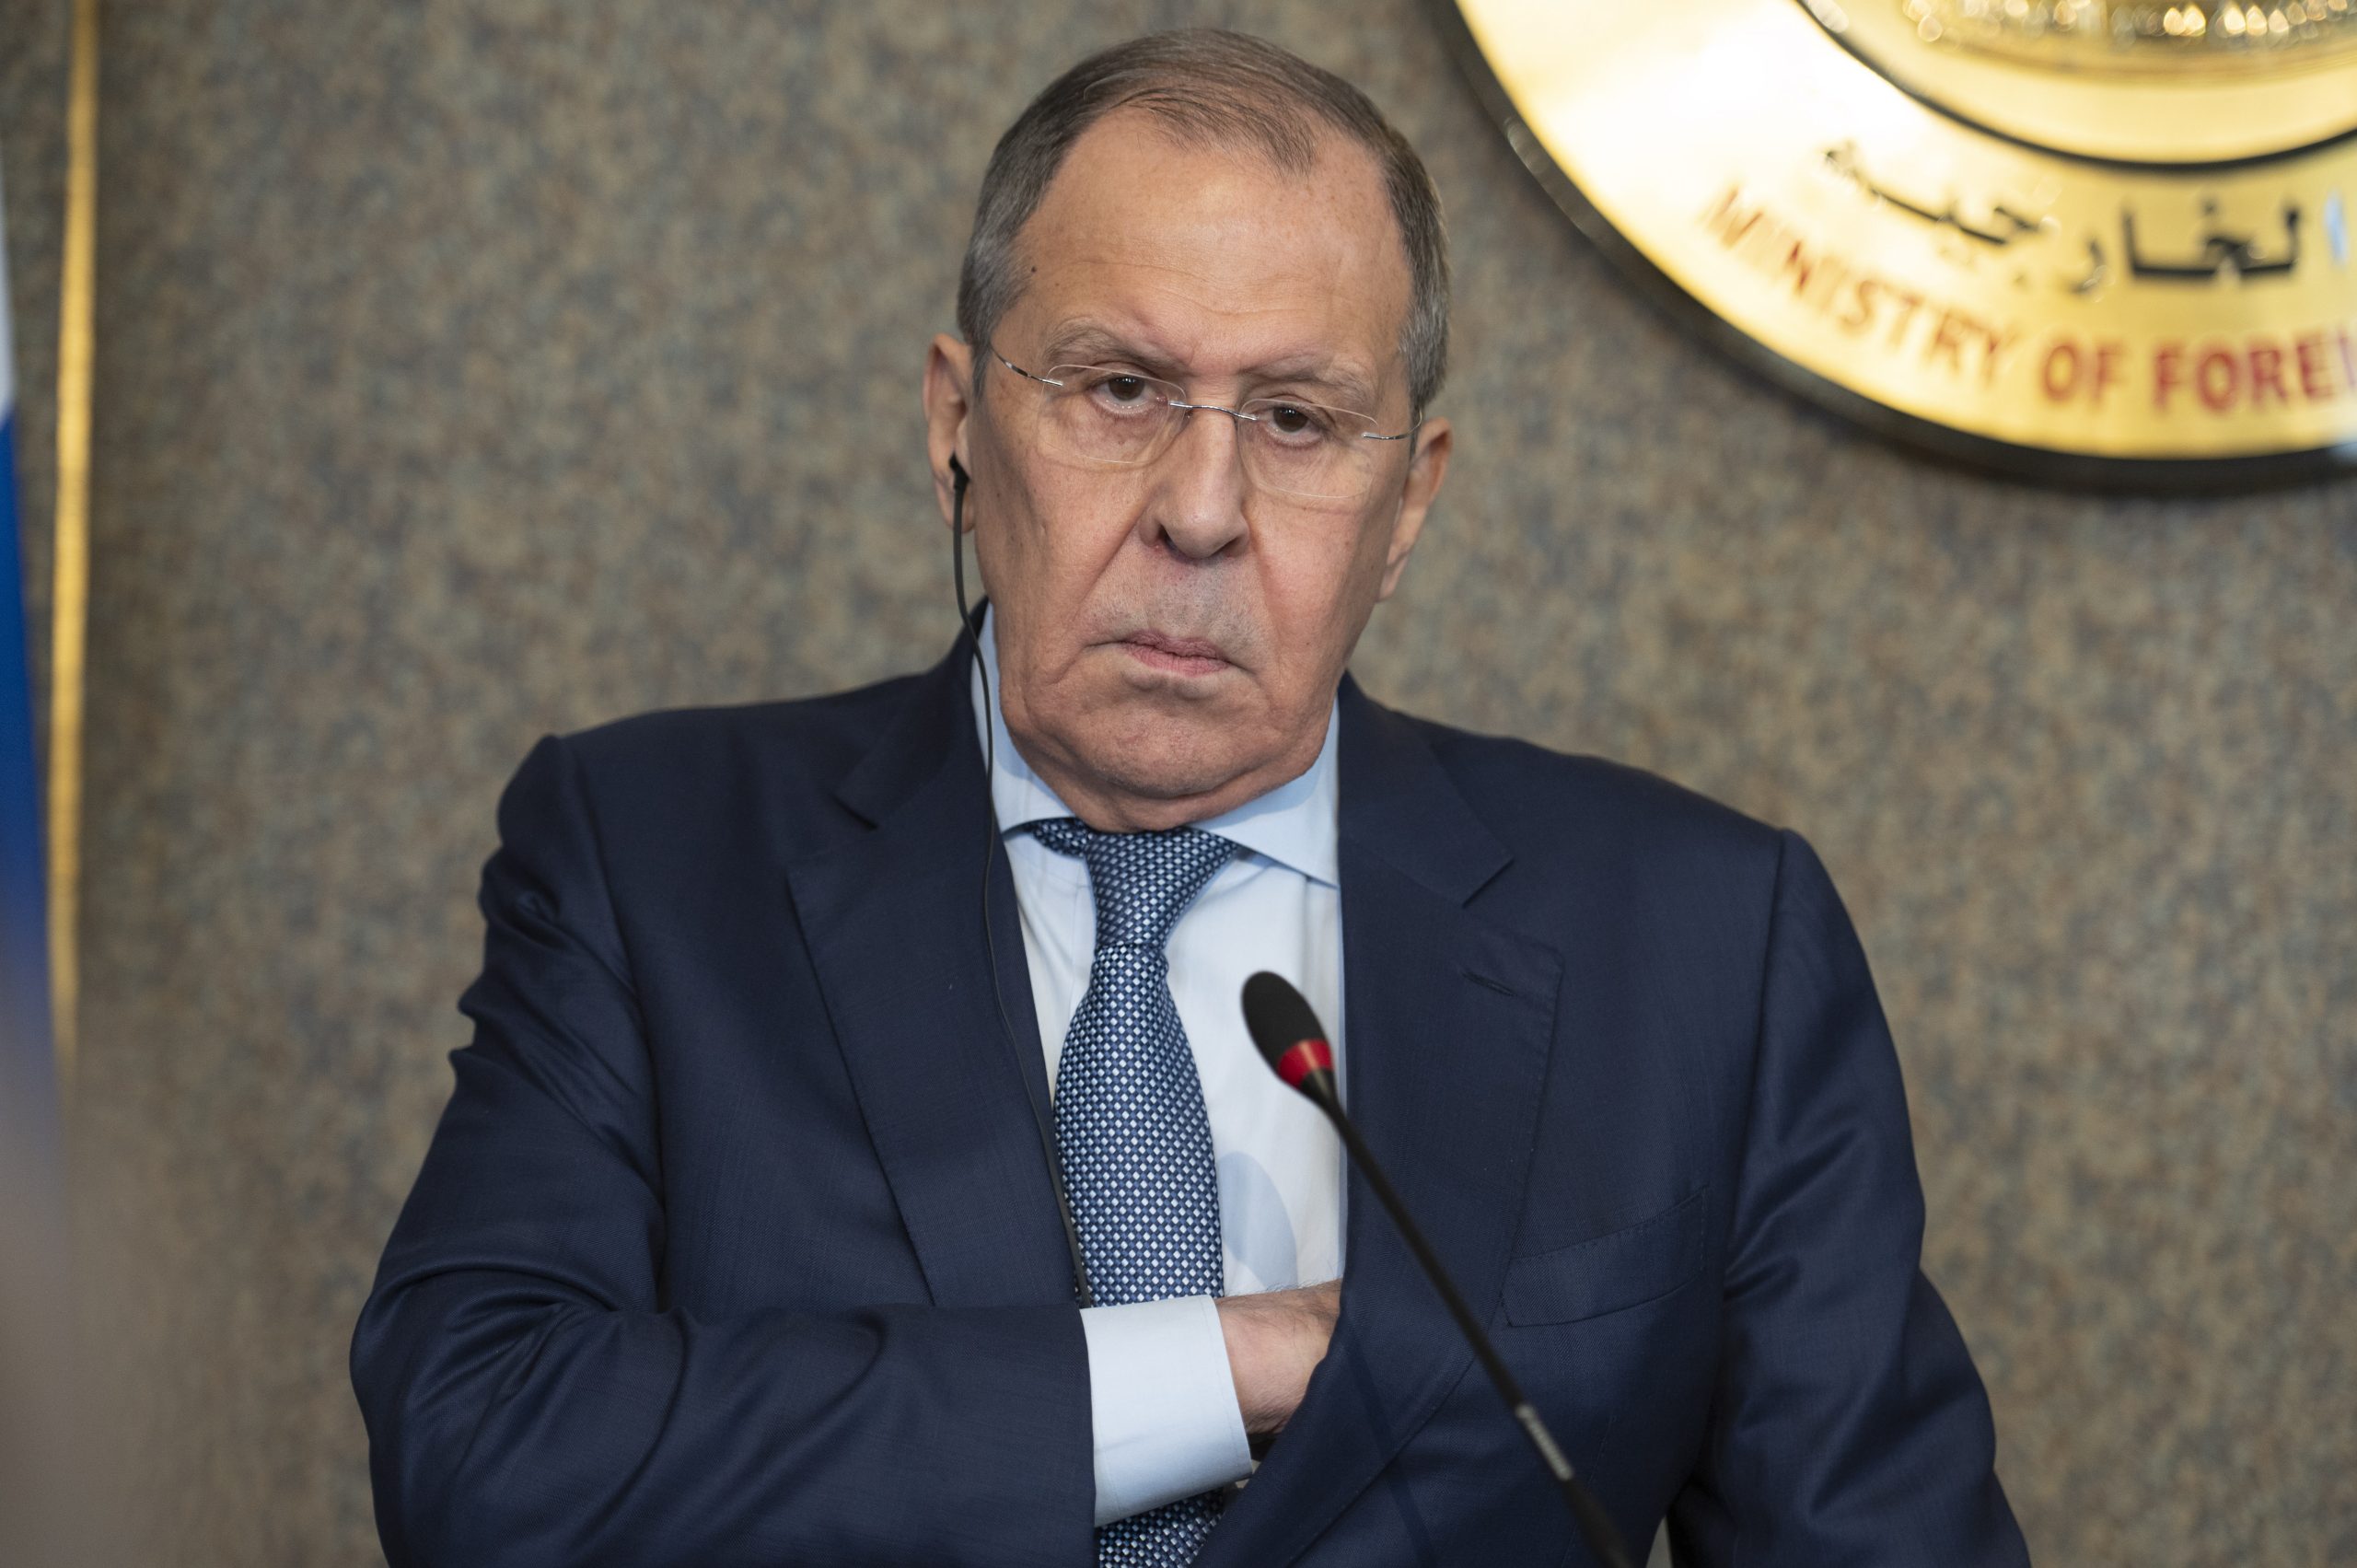 epa10089557 Russian Foreign Minister Sergei Lavrov attends a press conference after a meeting with his Egyptian counterpart Shoukry, in Cairo, Egypt, 24 July 2022. Lavrov is on an official visit to Egypt.  EPA/MOHAMED HOSSAM